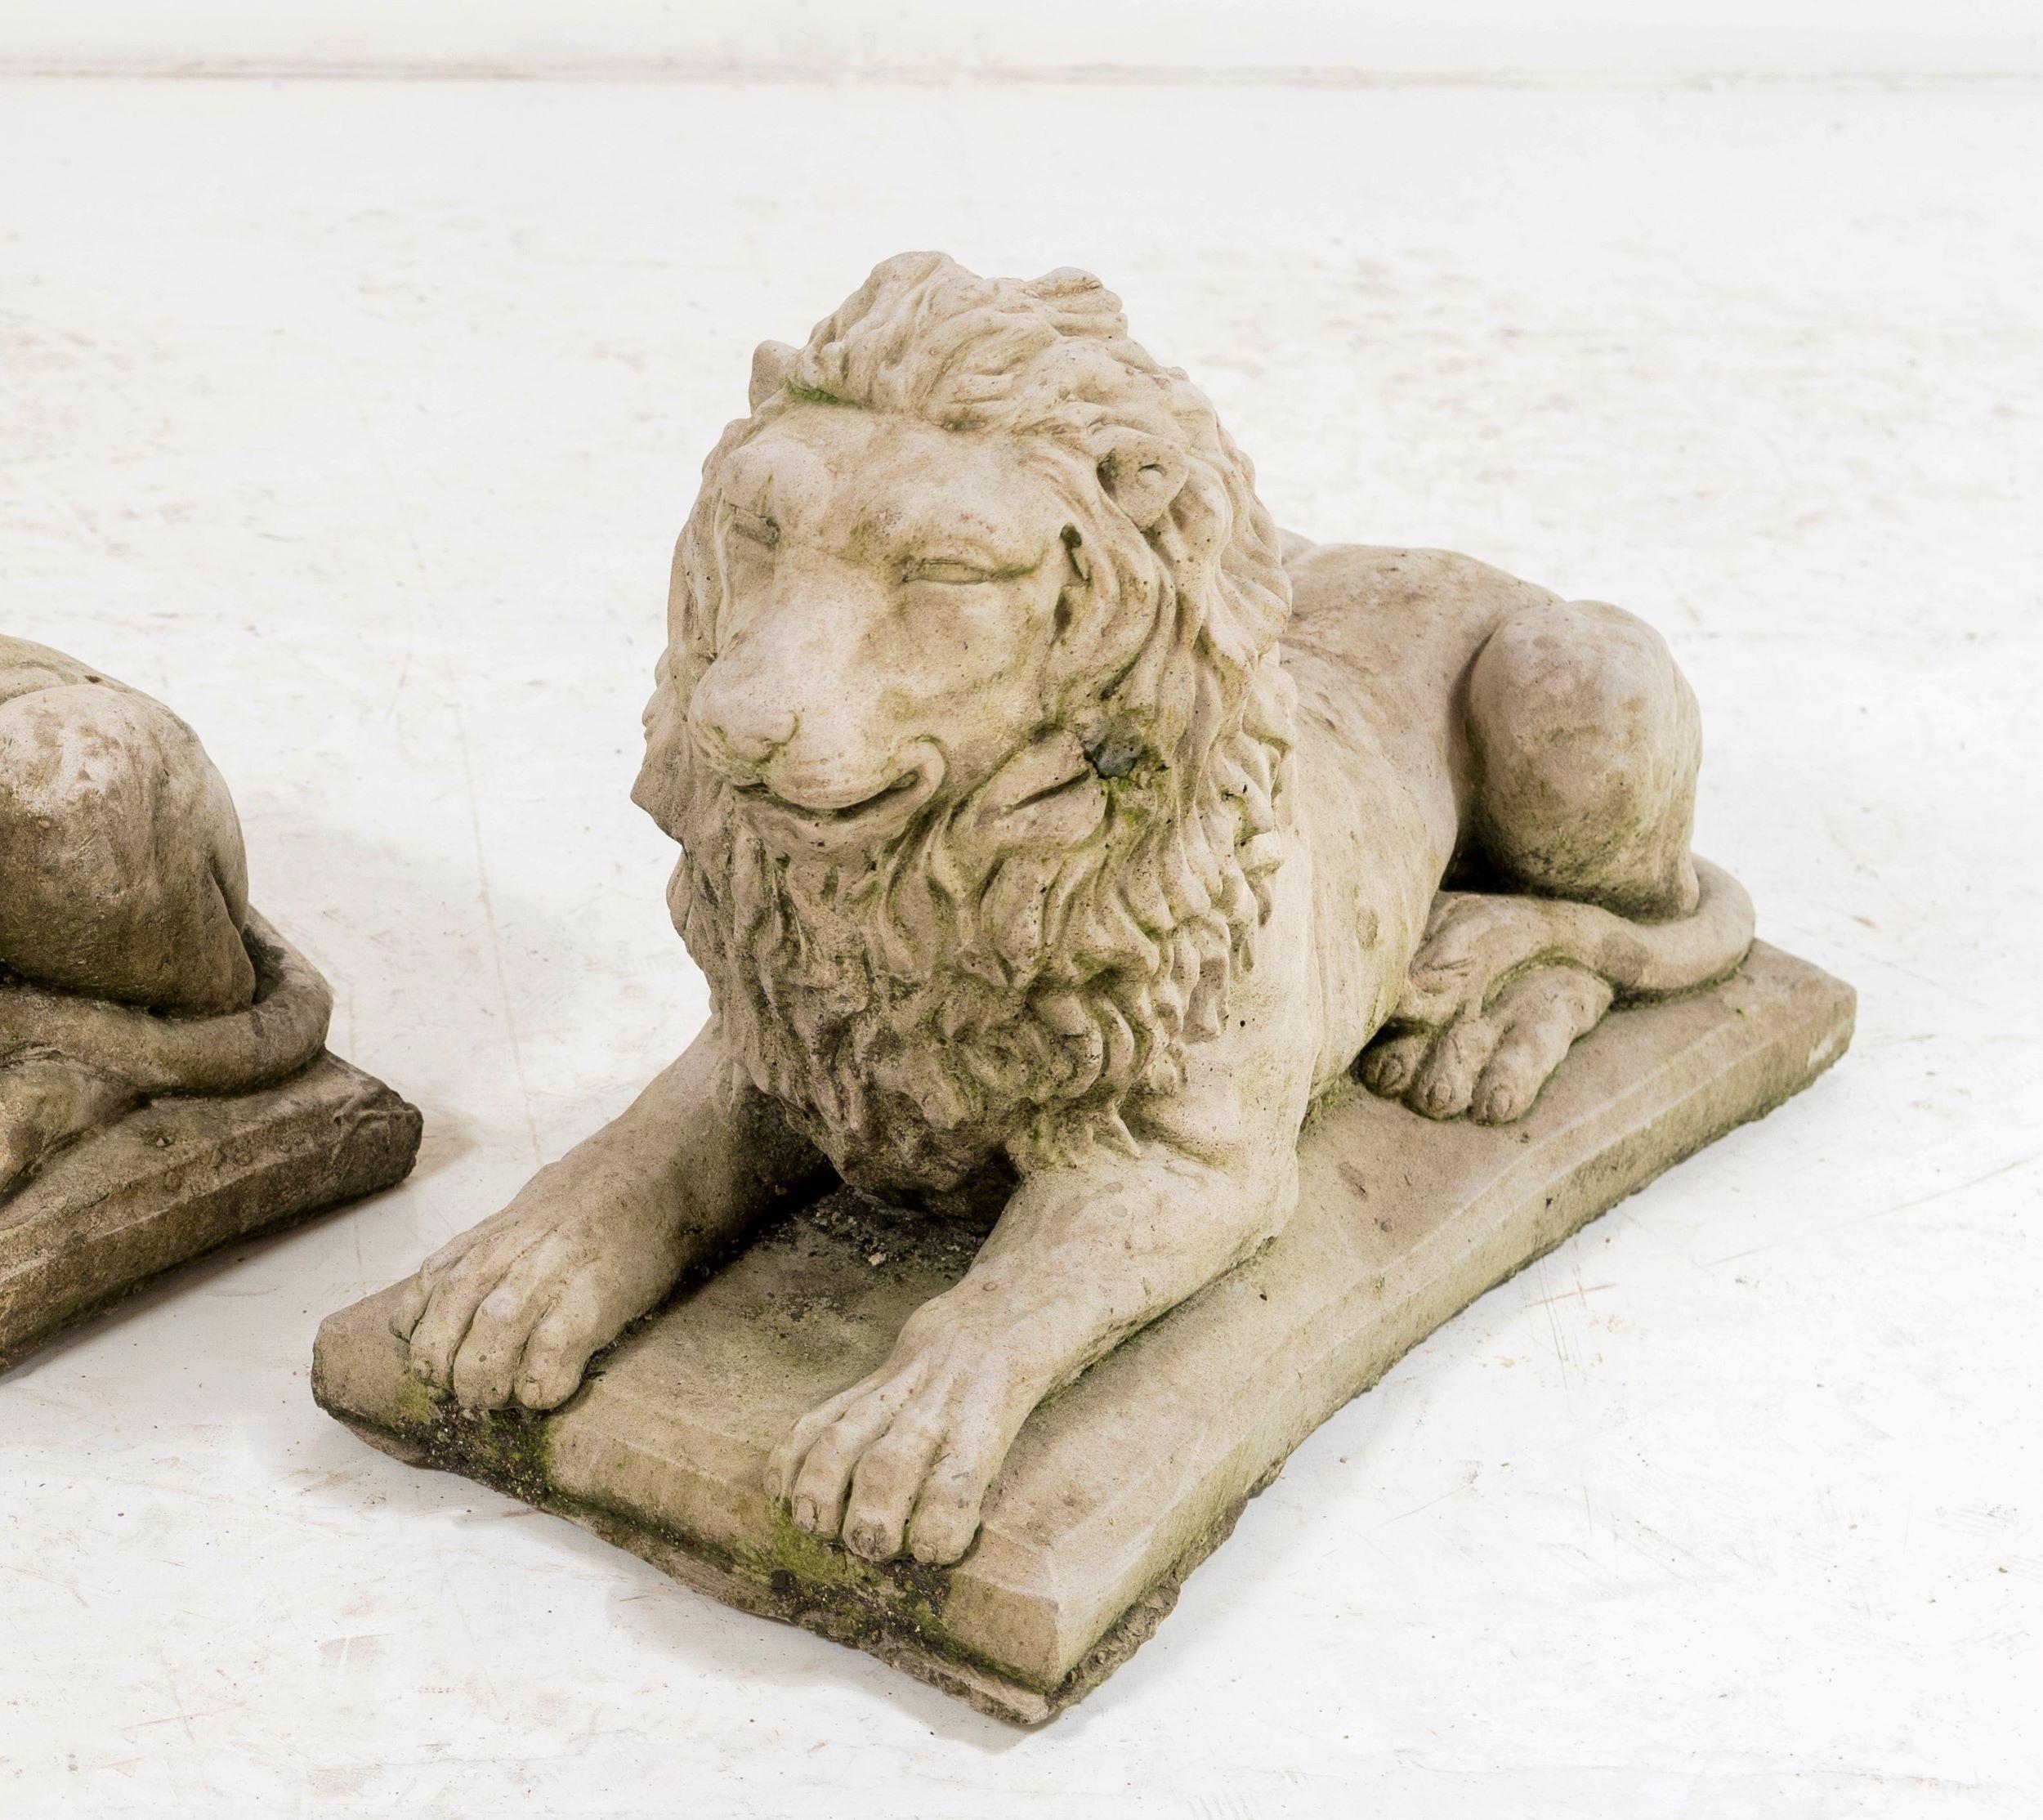 20th Century Pair of Good Quality Recumbent Lions Garden Statue Weathered Ornaments